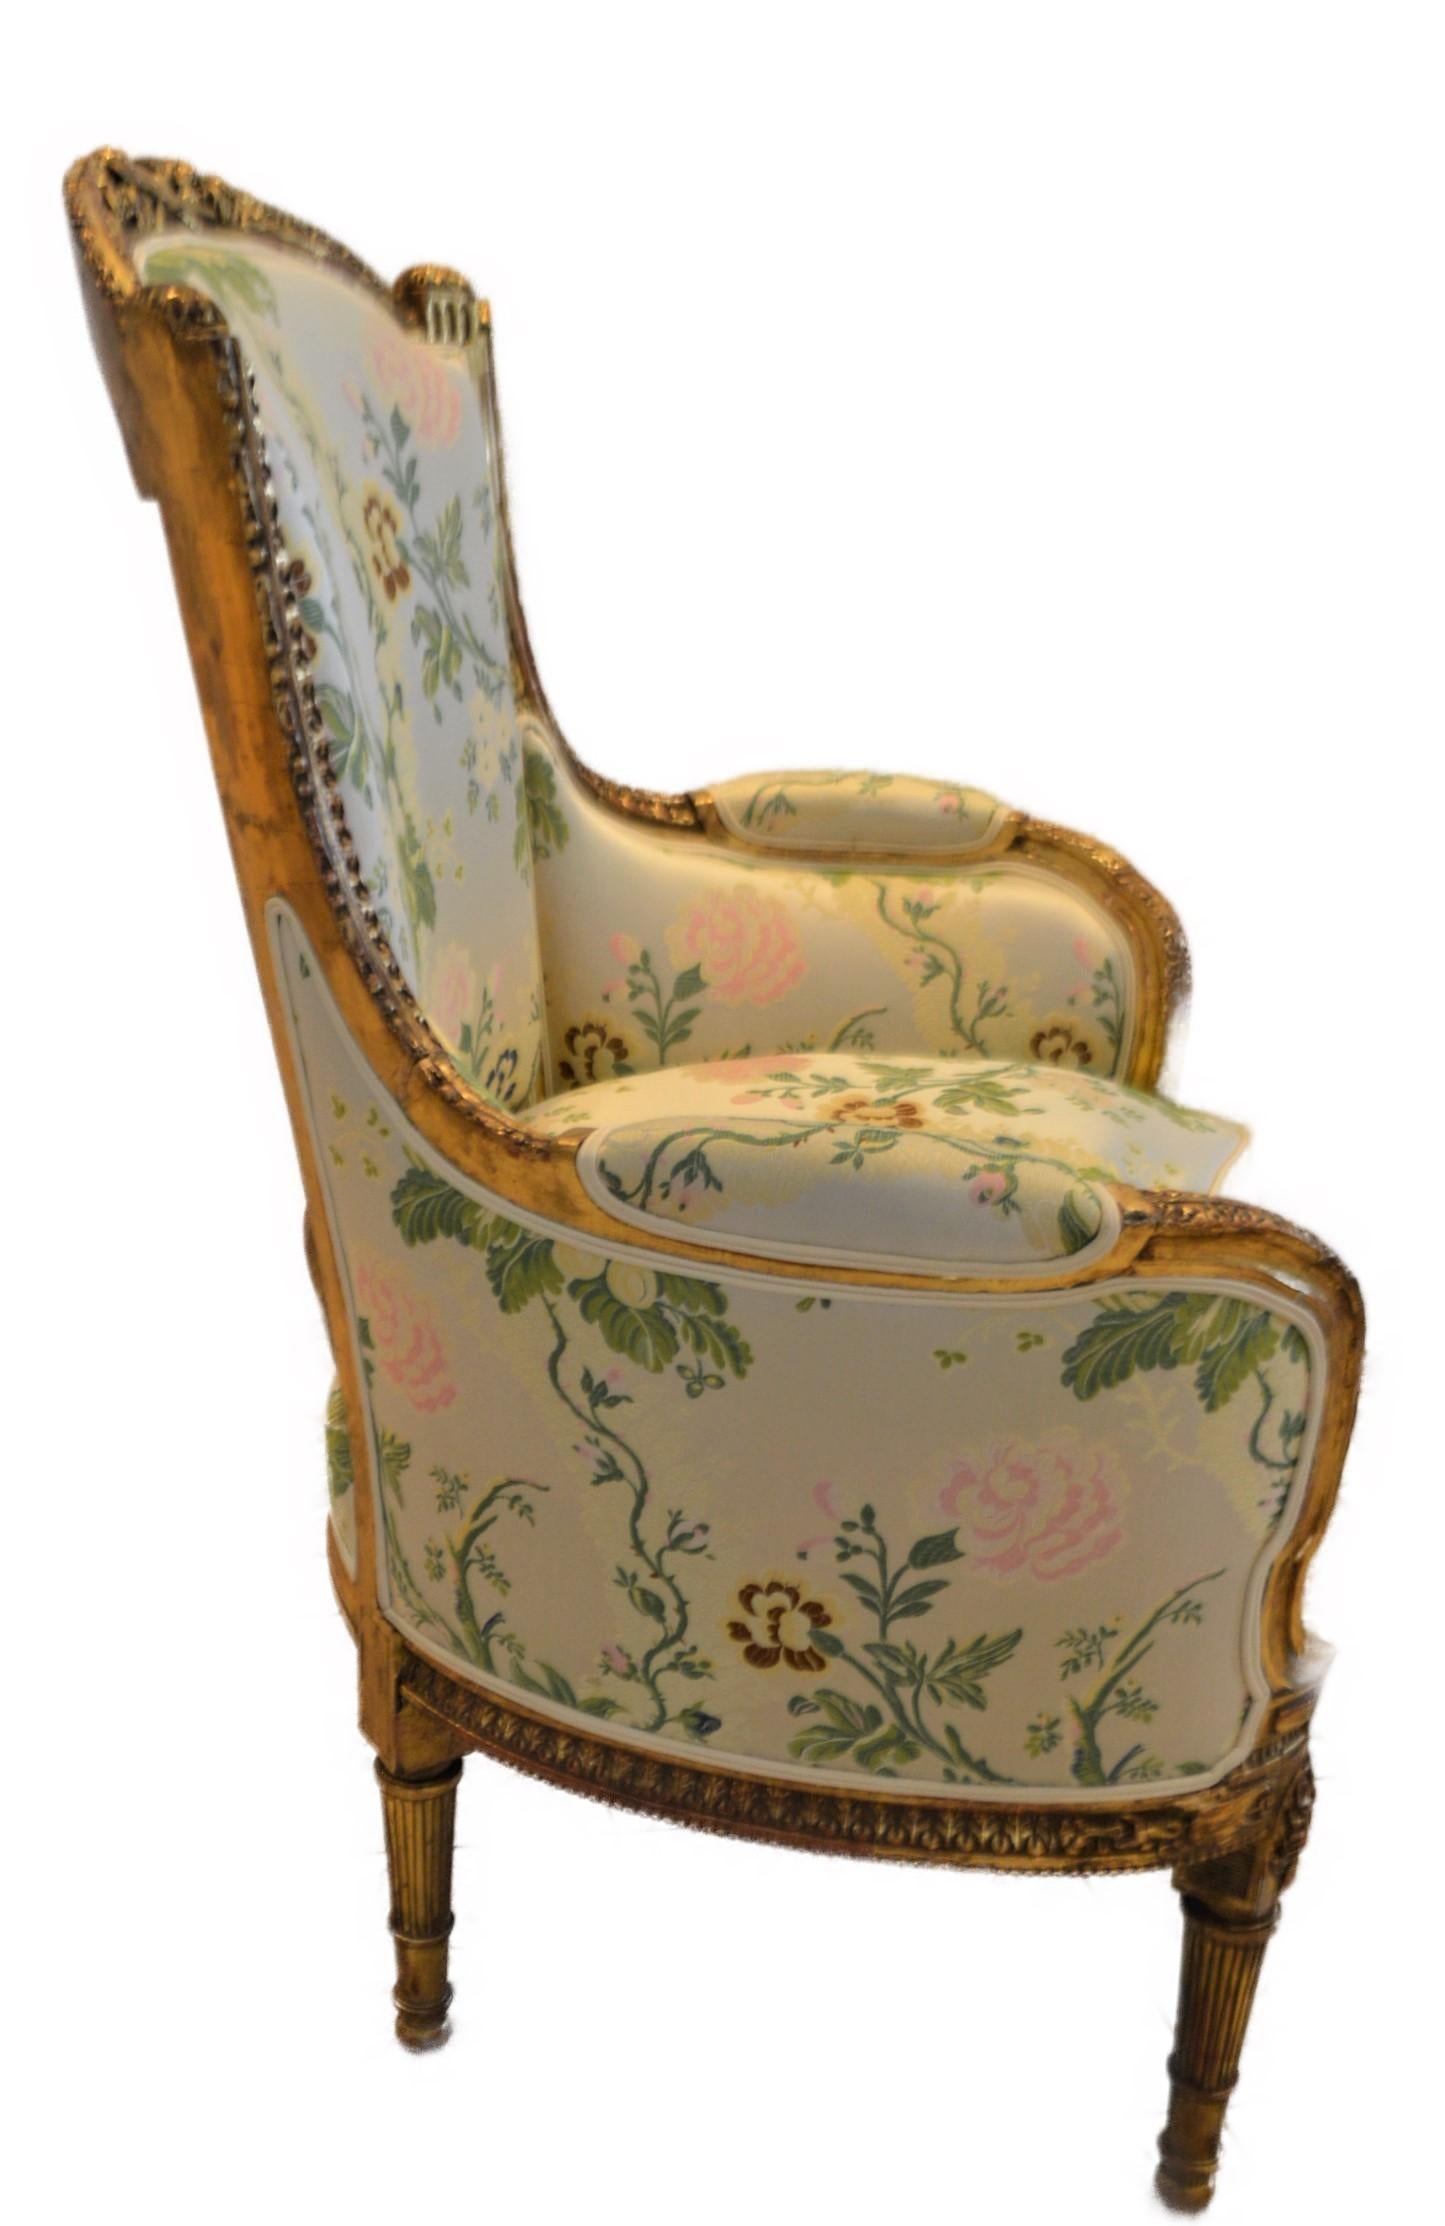 French Louis XVI style leaf gilded bergere chair, hand carved, silk botanical fabric.